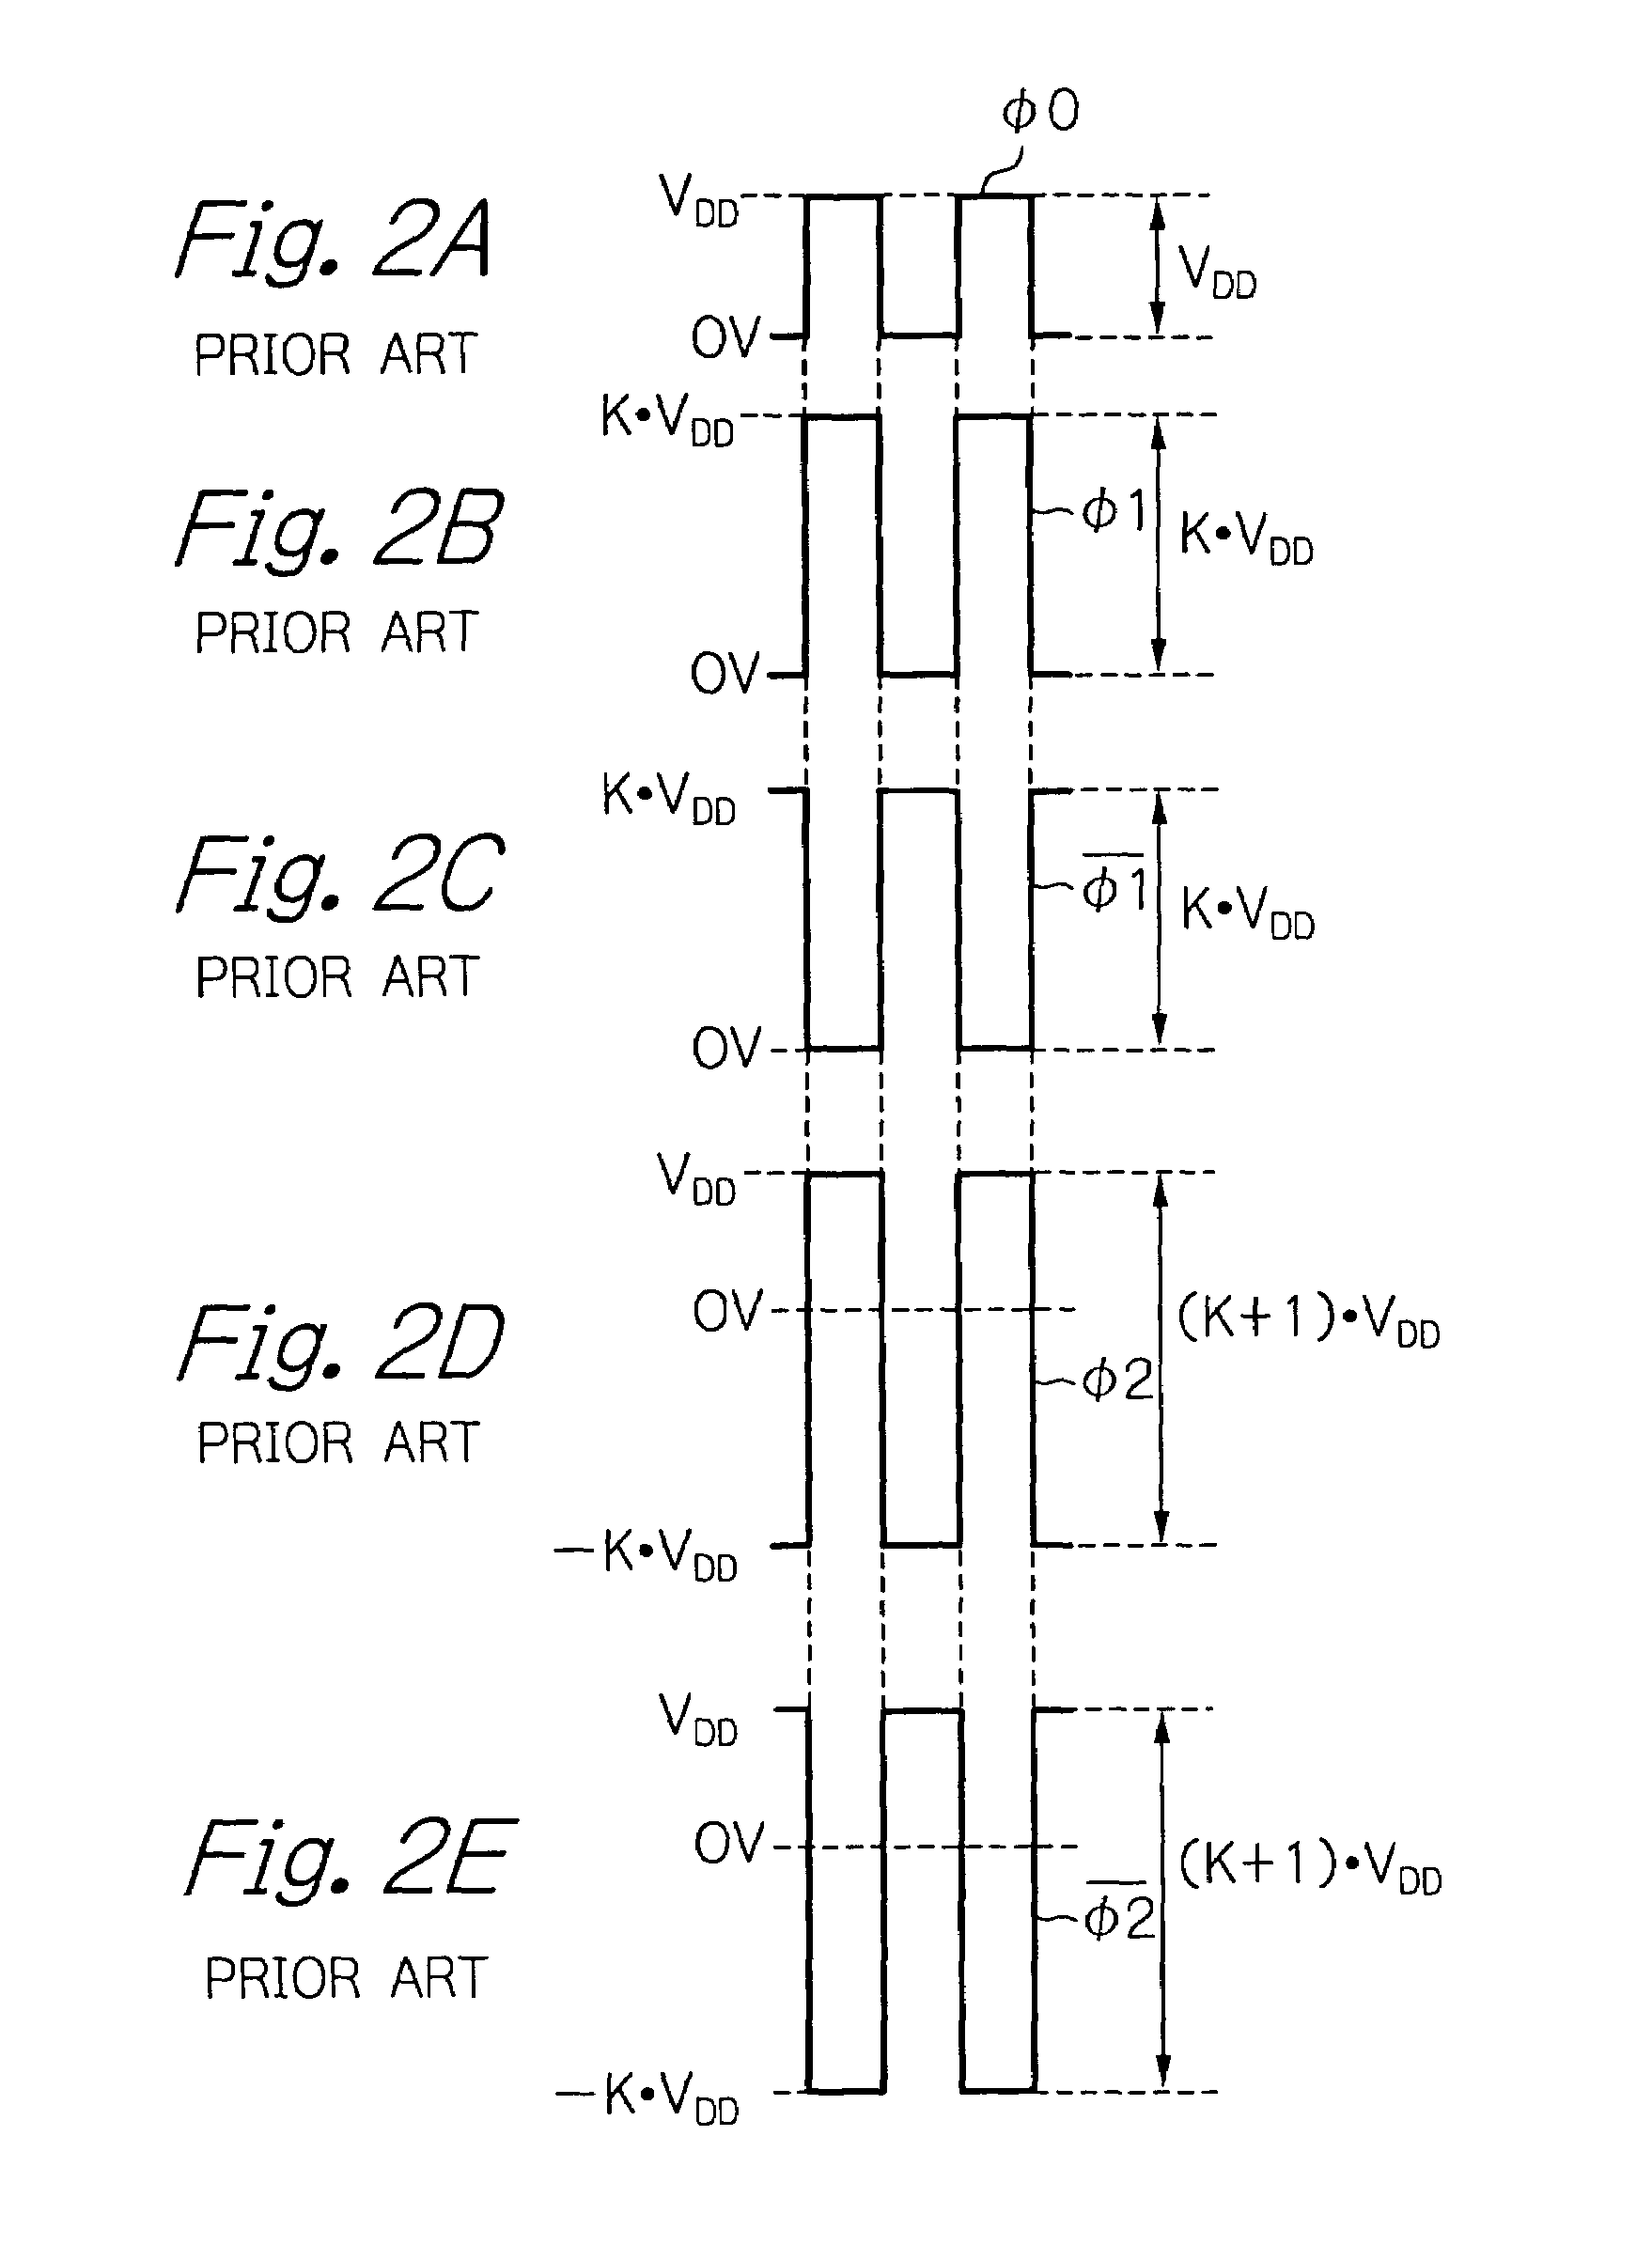 Simple step-up apparatus including level shift circuits capable of low breakdown voltage